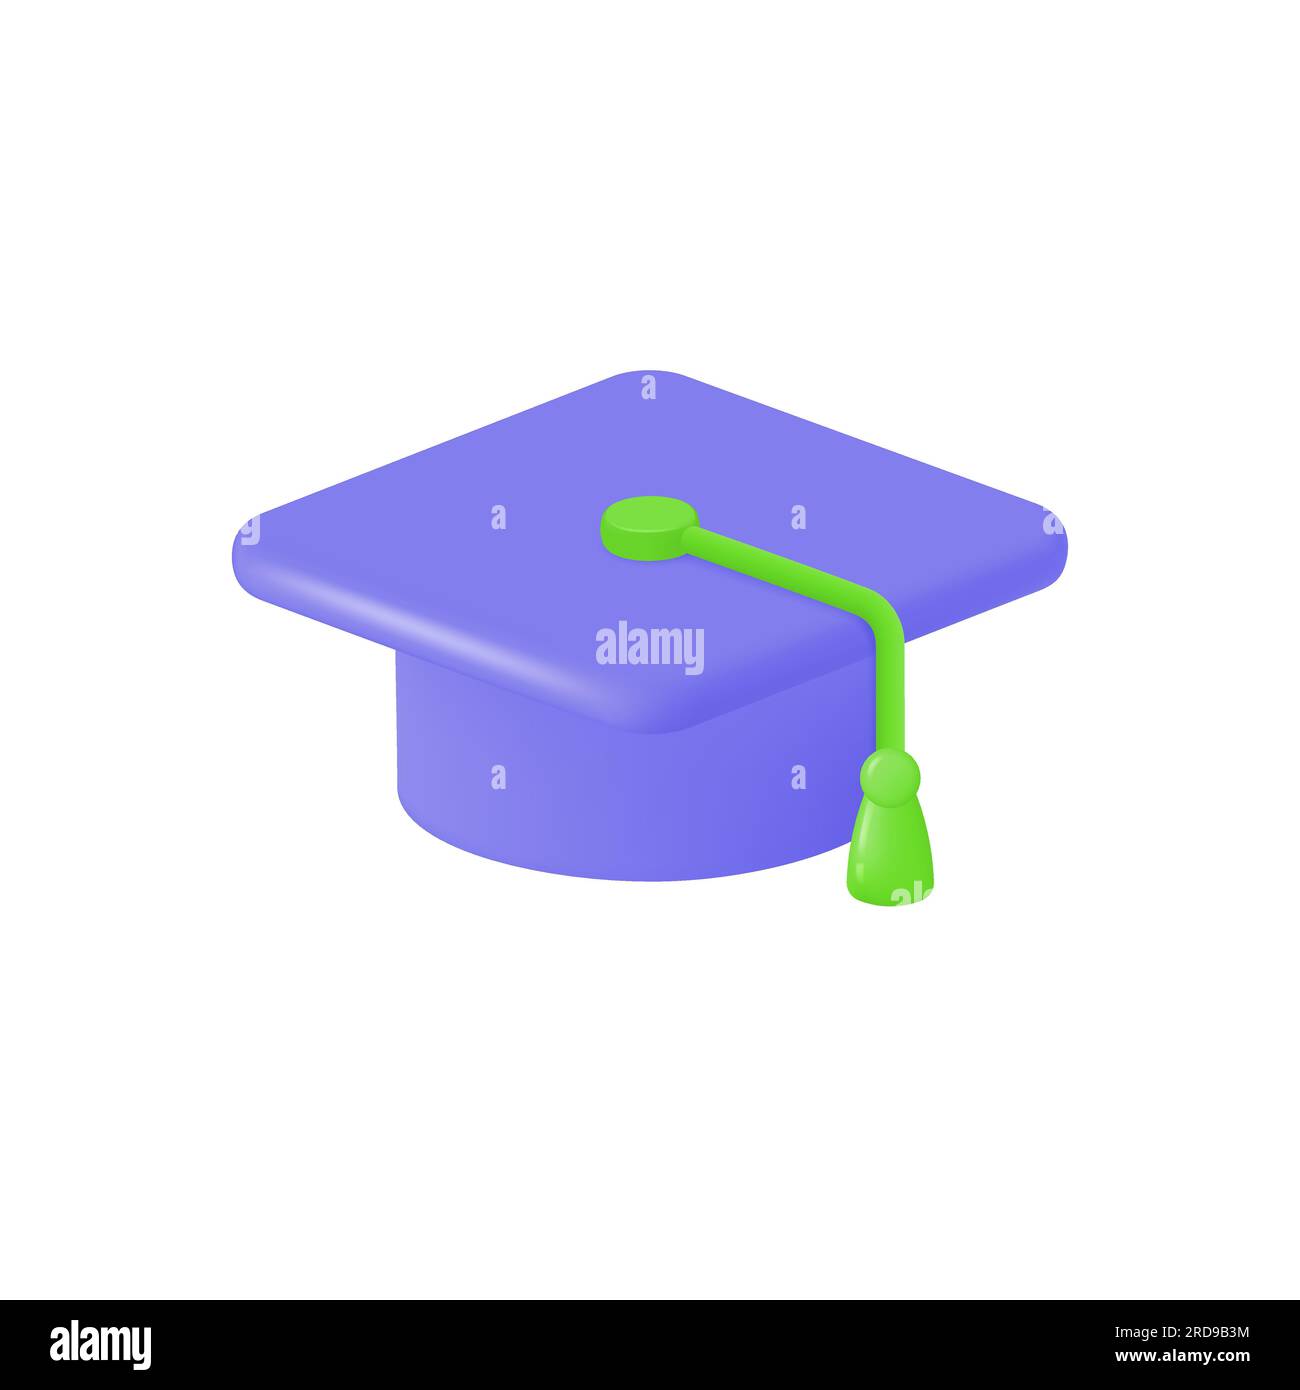 3d college cap icon in cartoon style. the concept of getting education, university, getting diplomas. vector illustration isolated on white background Stock Vector